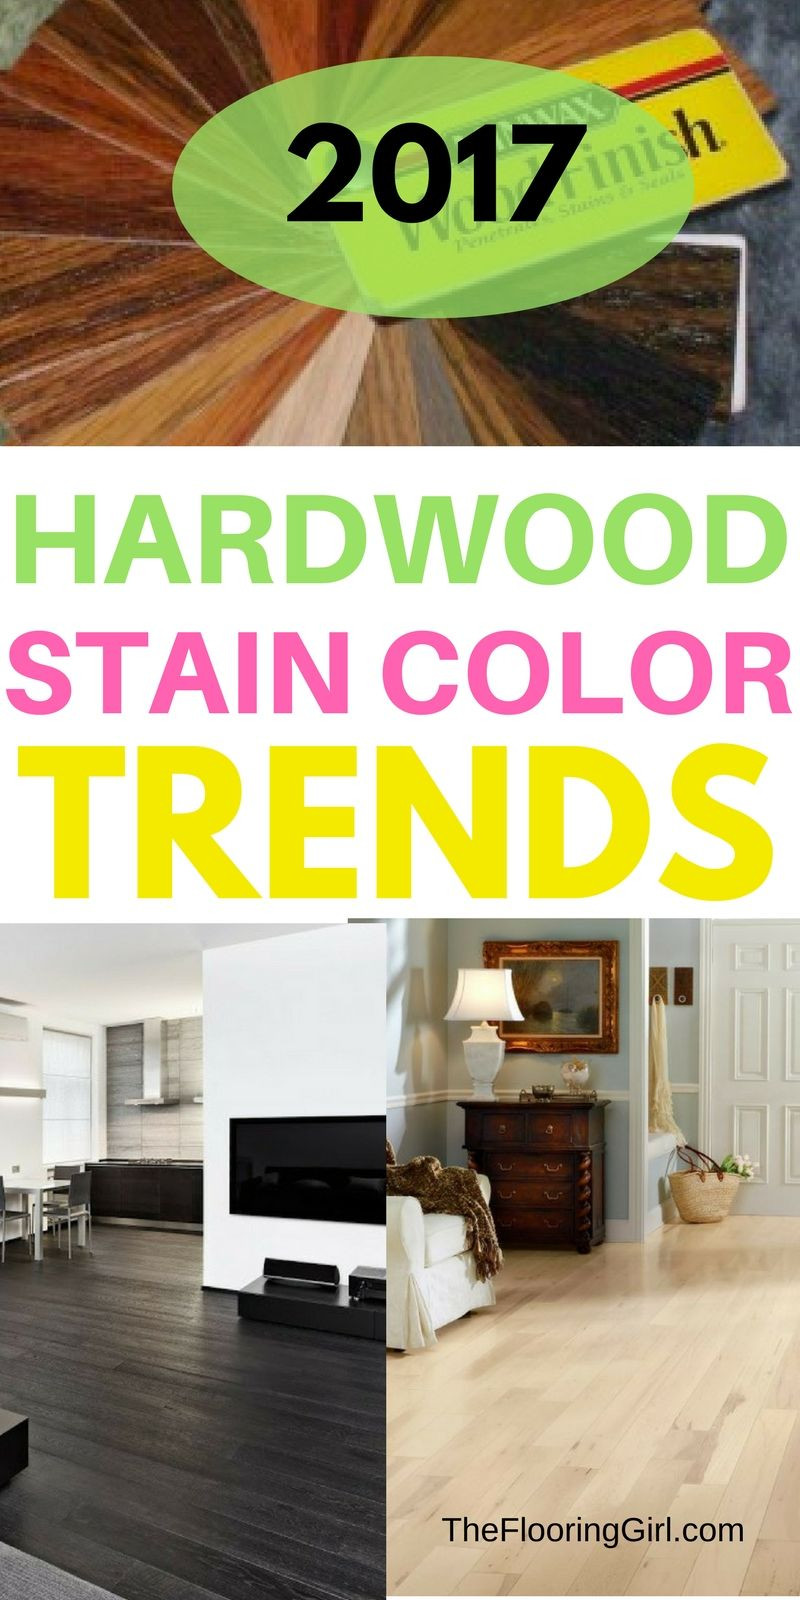 25 Unique Different Colored Hardwood Floors Same House 2024 free download different colored hardwood floors same house of hardwood flooring stain color trends 2018 more from the flooring within hardwood flooring stain color trends for 2017 hardwood colors that are